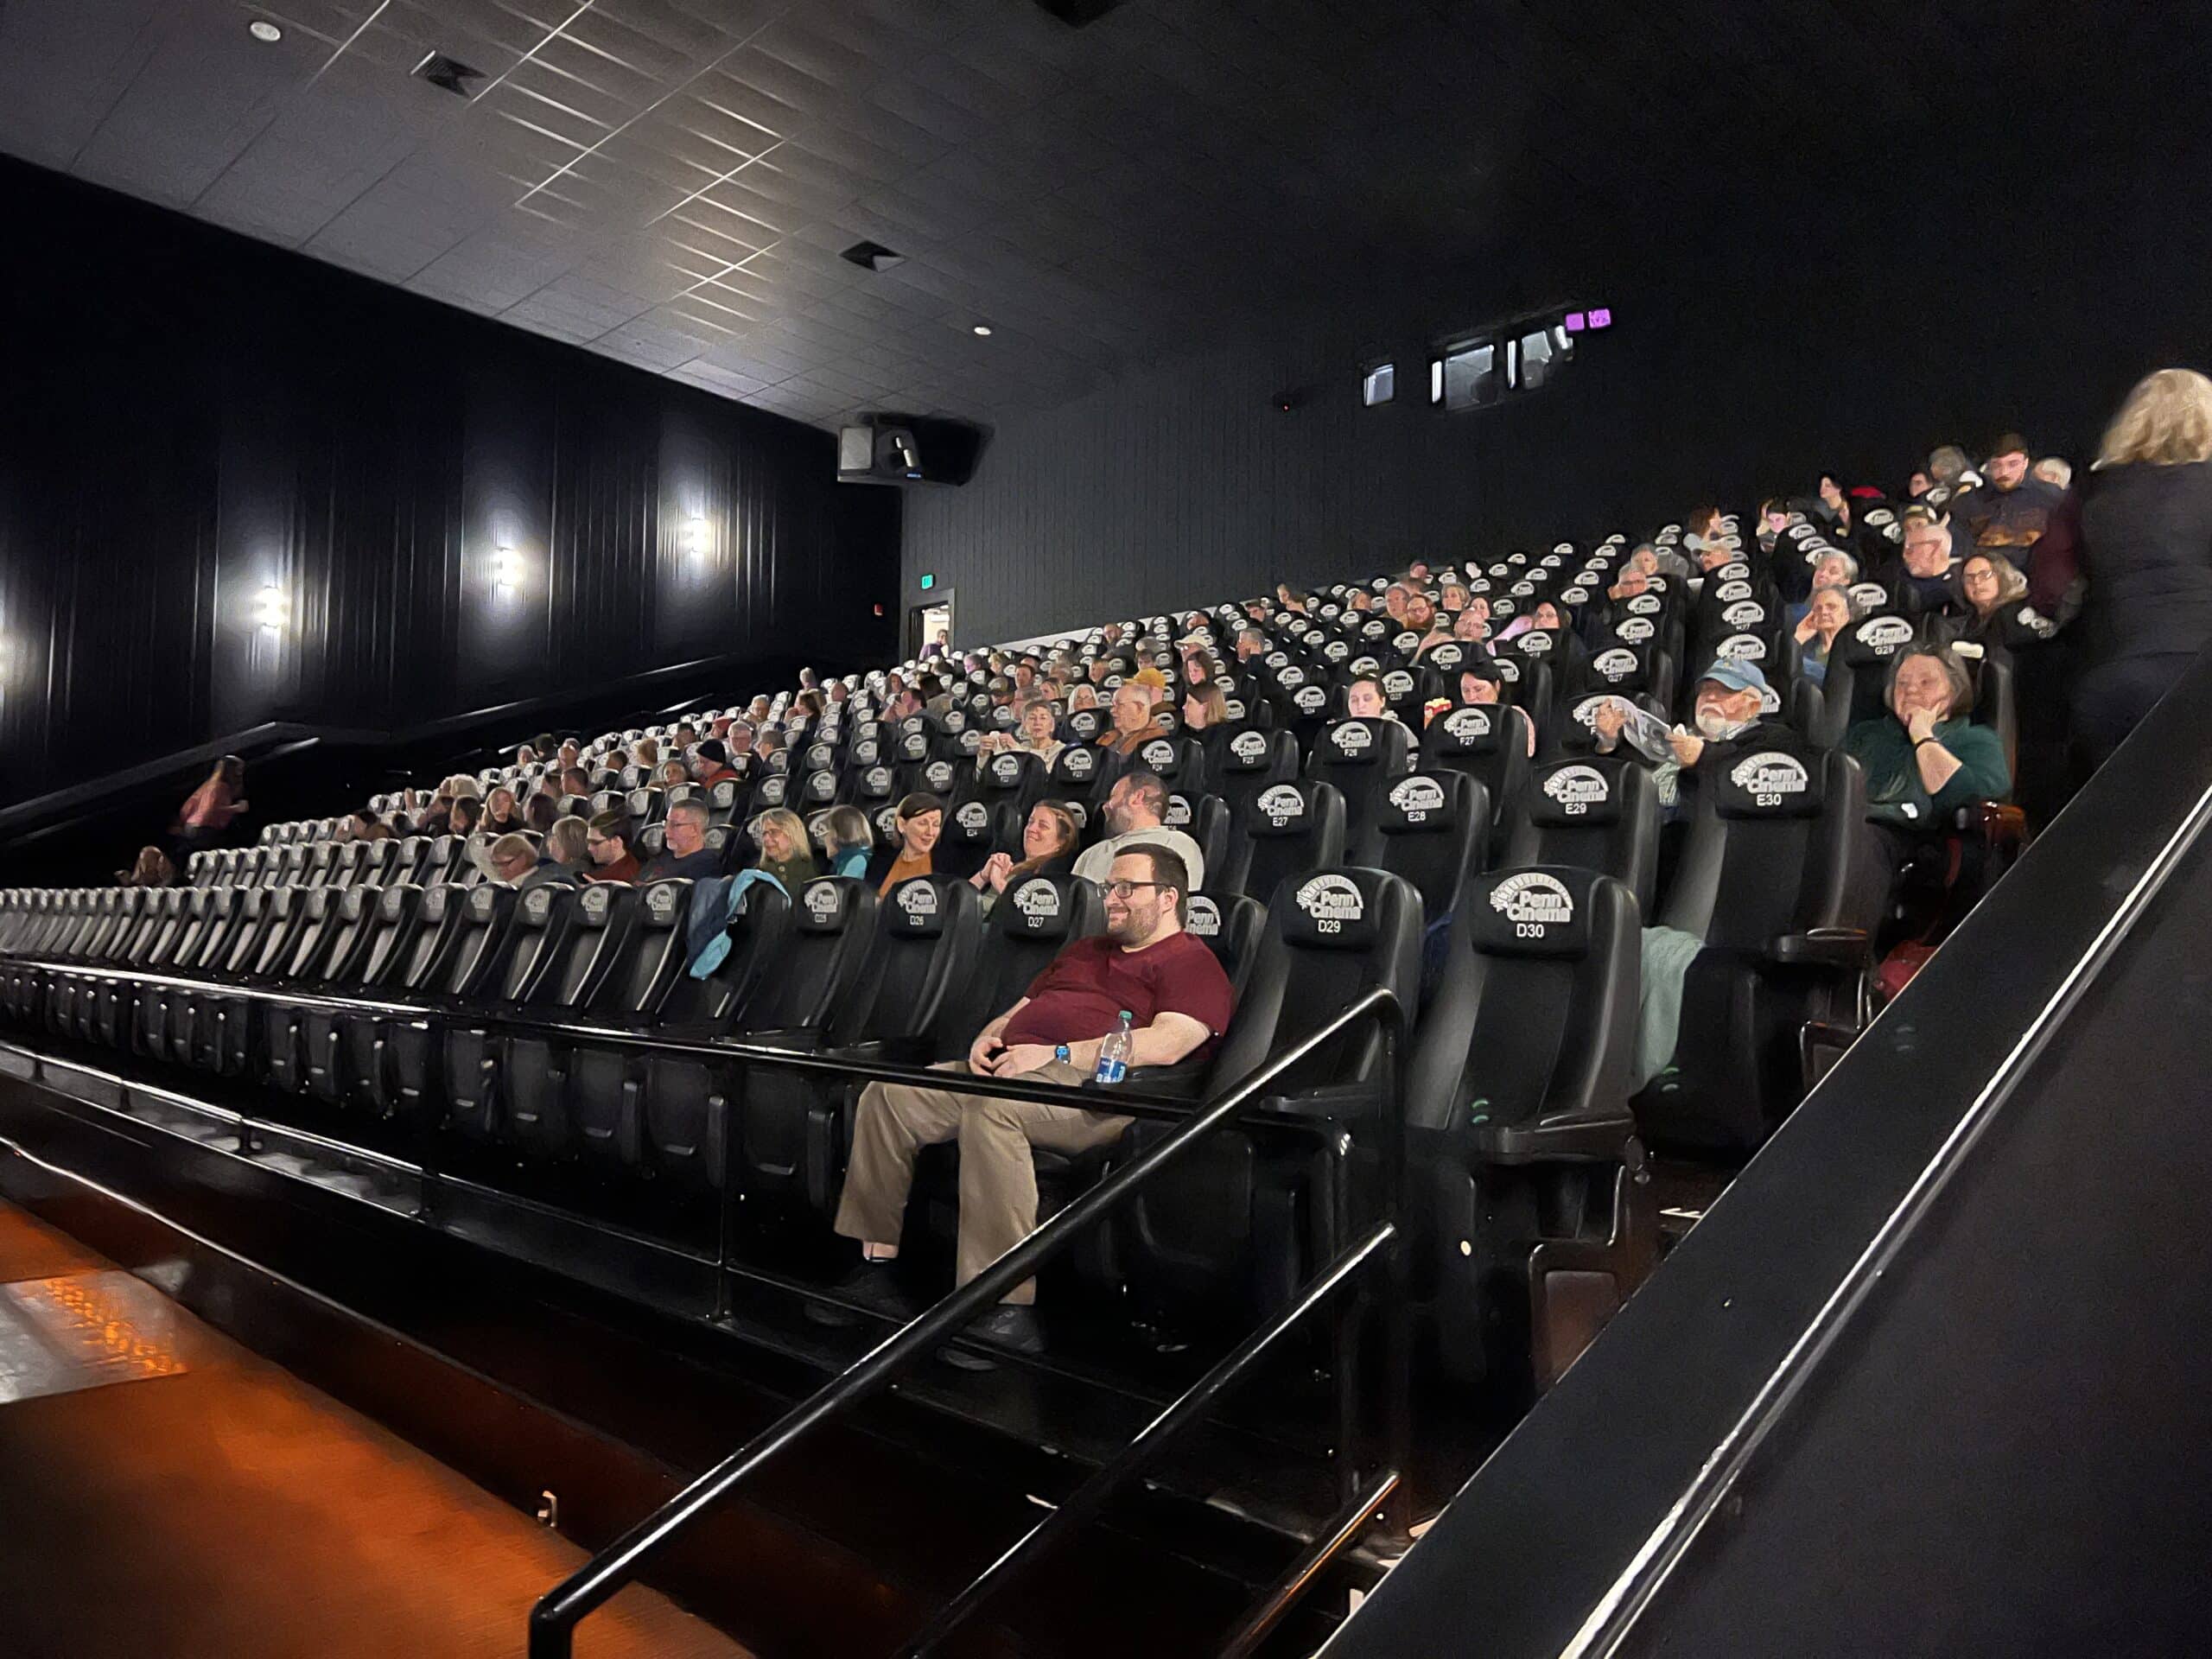 A movie theater full of people